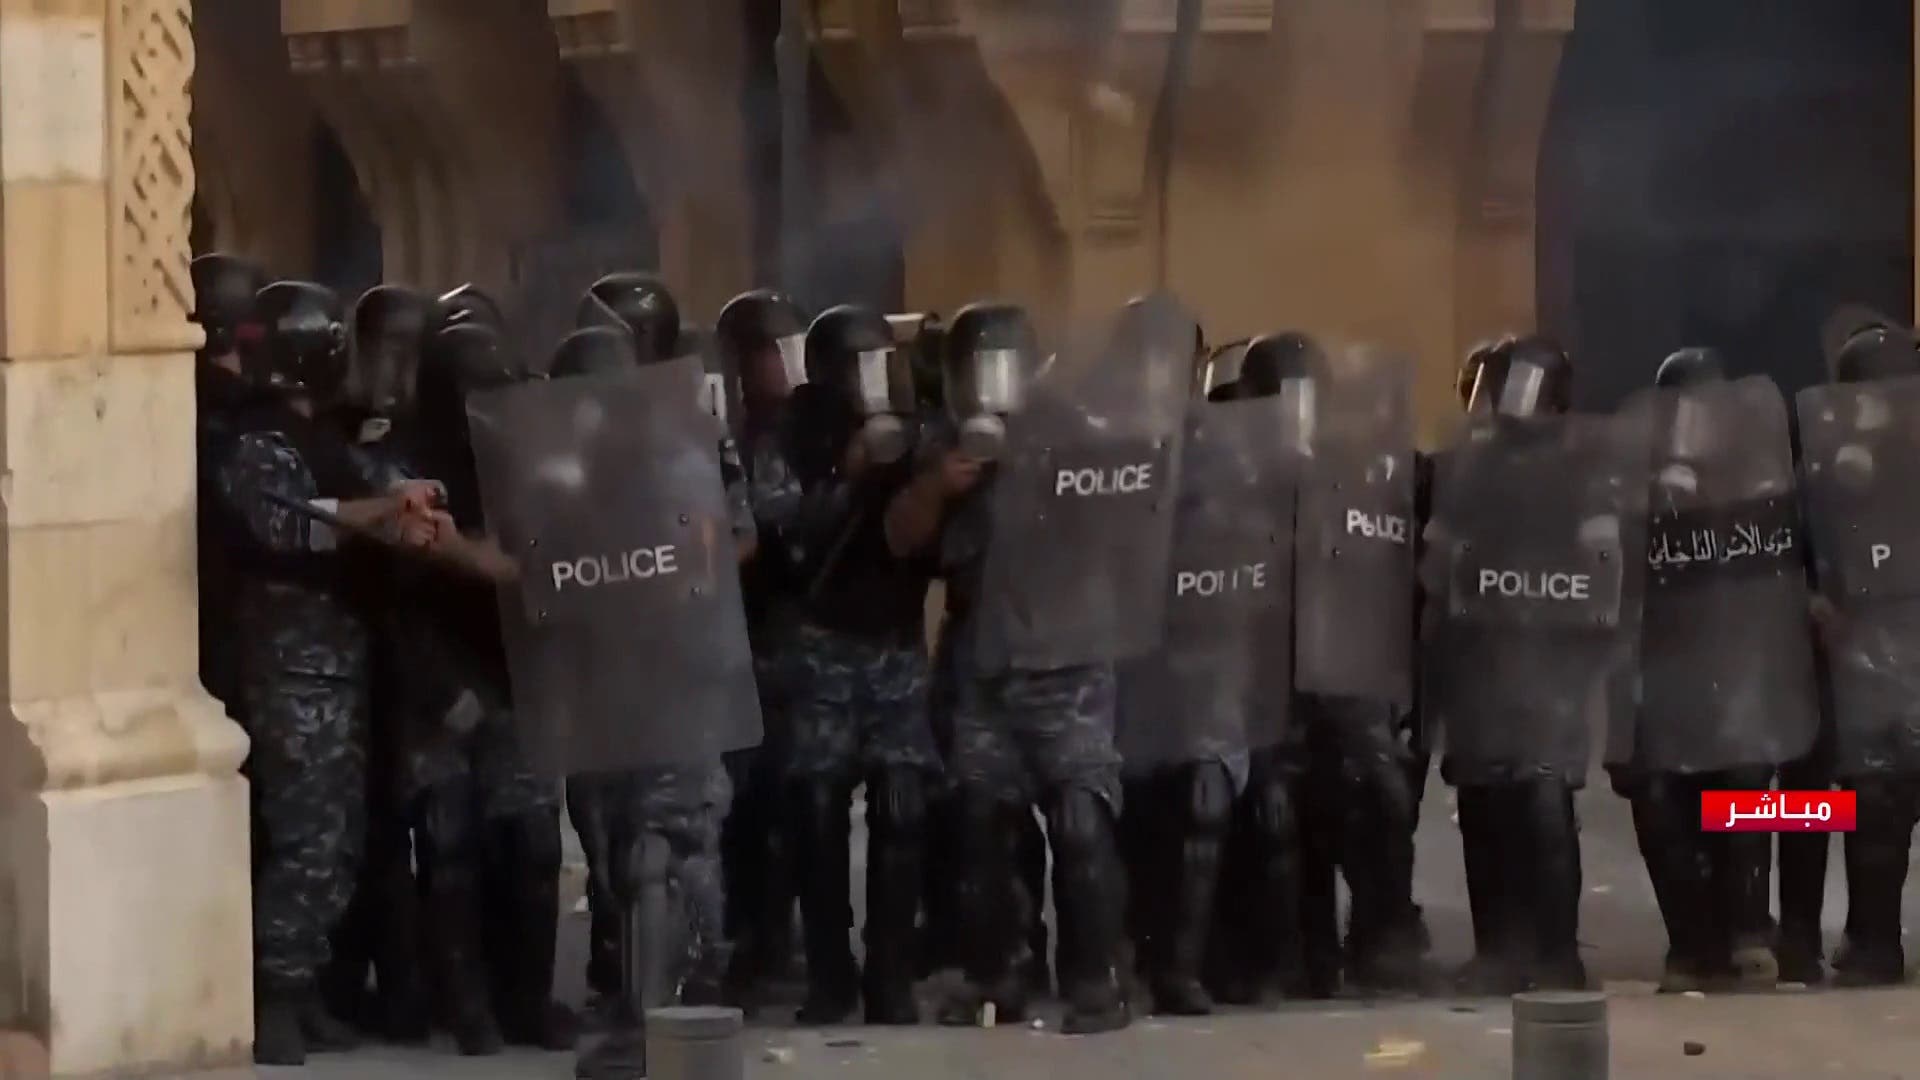 Lebanese police forces confront protesters near parliament. (Al Arabiya)